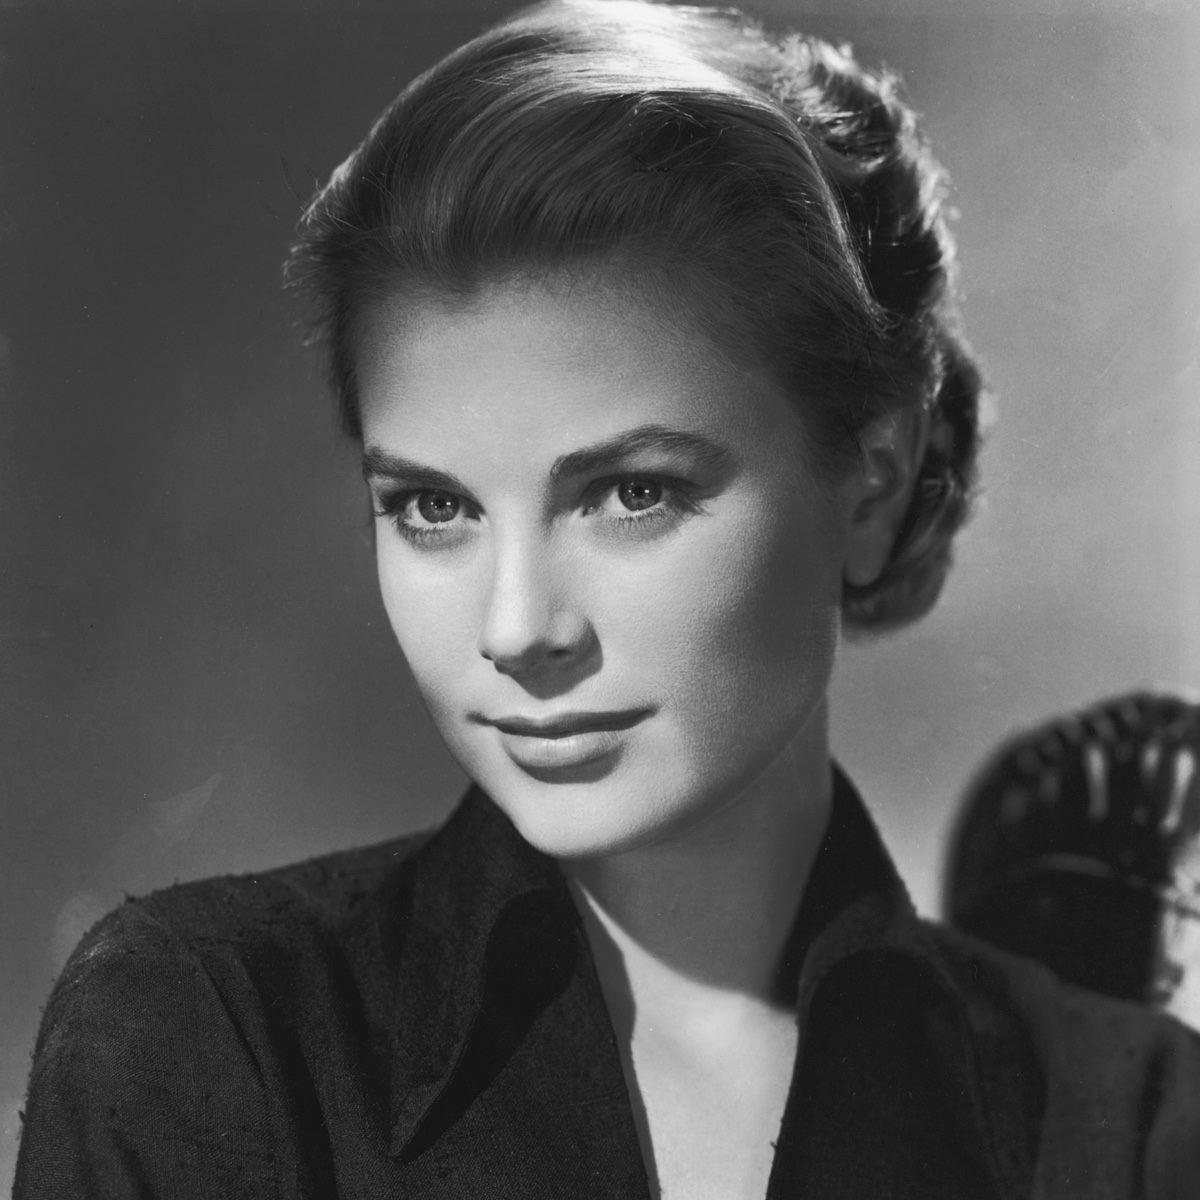 GRACE KELLY. The actress married Prince Rainier of Monaco. Photo from Facebook.com/tcmtv 